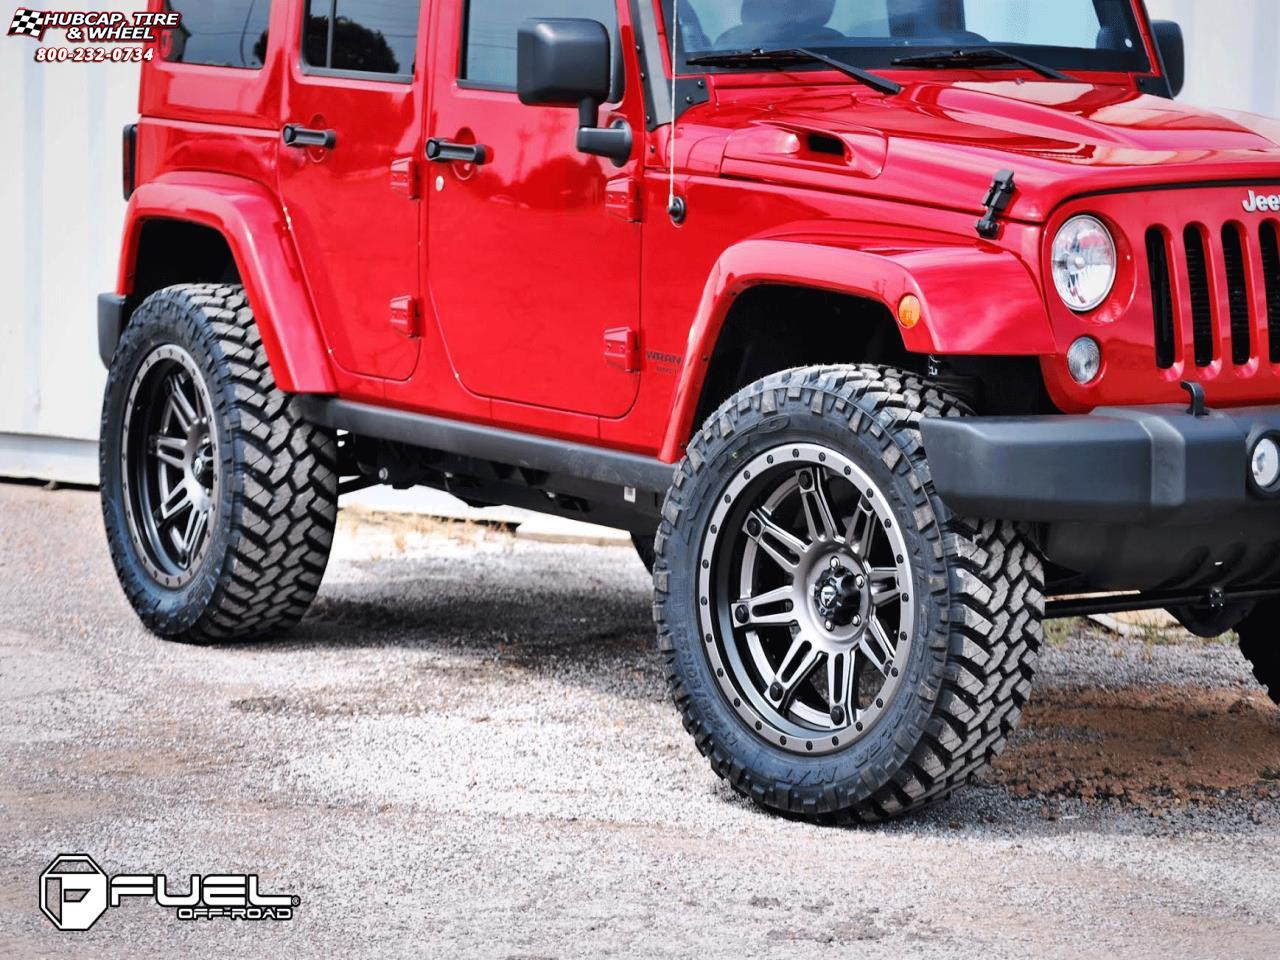 vehicle gallery/jeep wrangler fuel hostage ii d232 0X0  Anthracite Center, Matt Black & Anthracite Outer wheels and rims